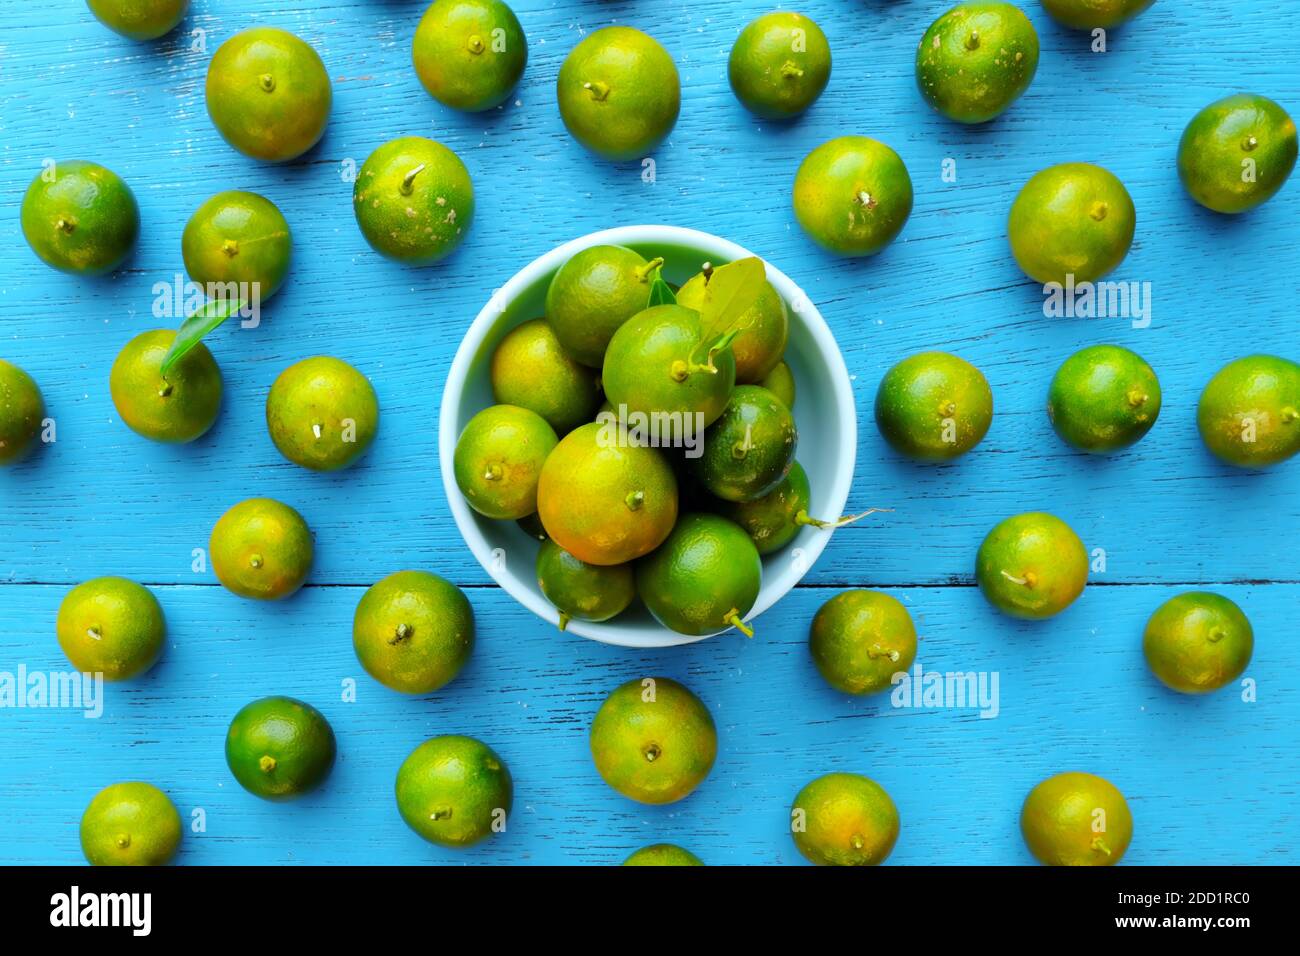 Yellow green calamansi, calamondin or philippine lime tropical fruit pattern in bright blue wood background. Asian summer citrus fruits flat lay. Stock Photo